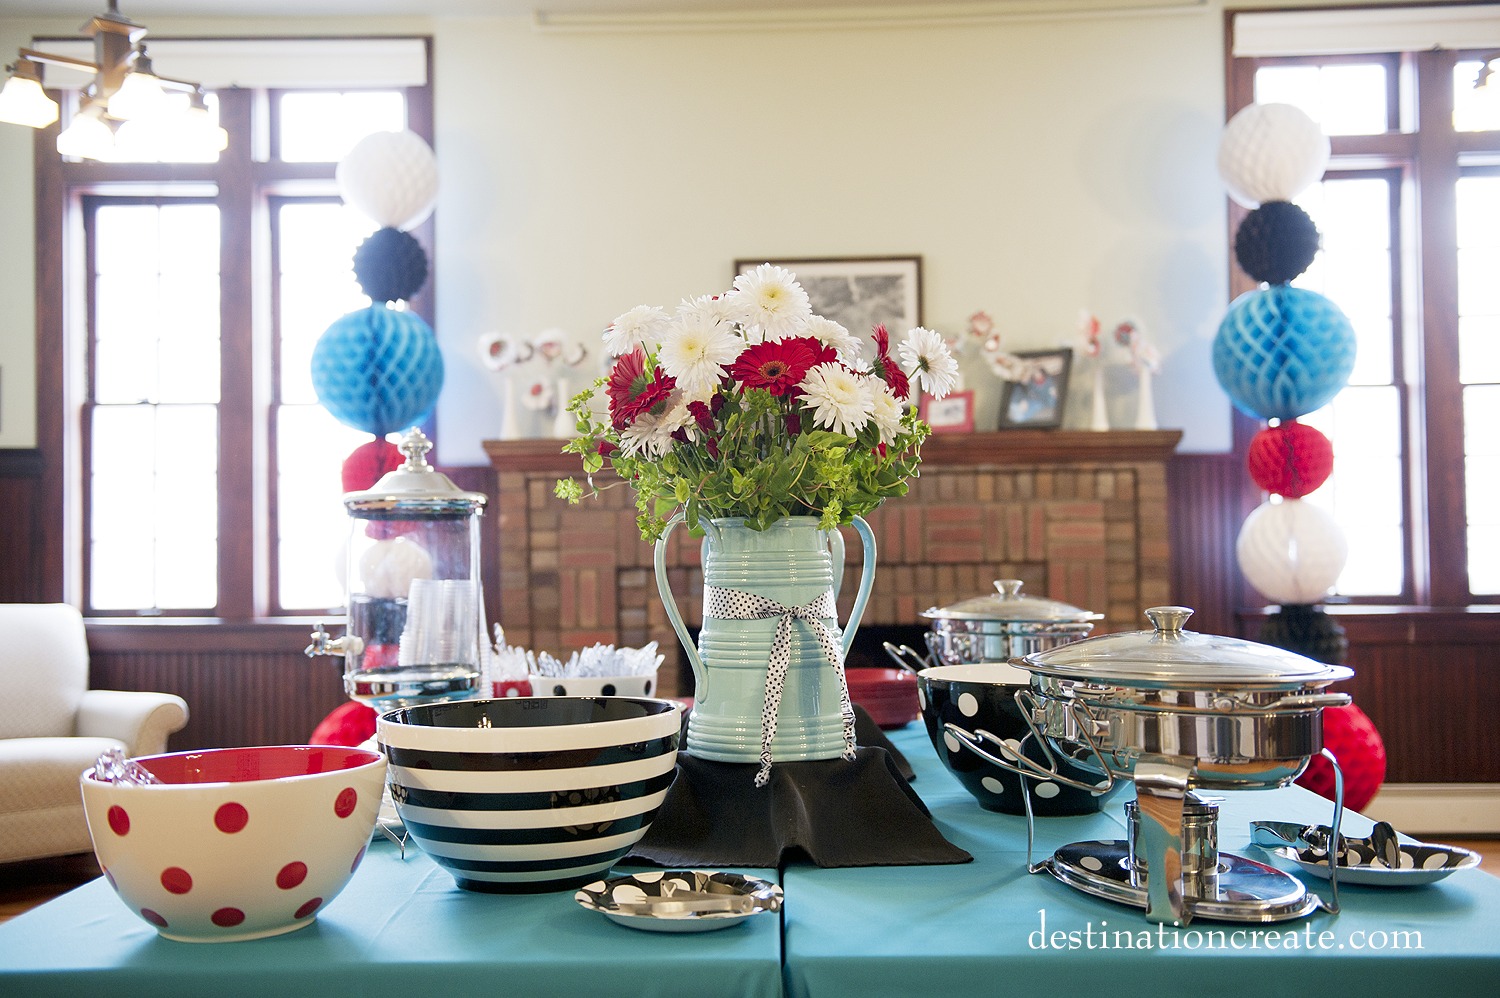 Retro wedding buffet in red, turquoise and black